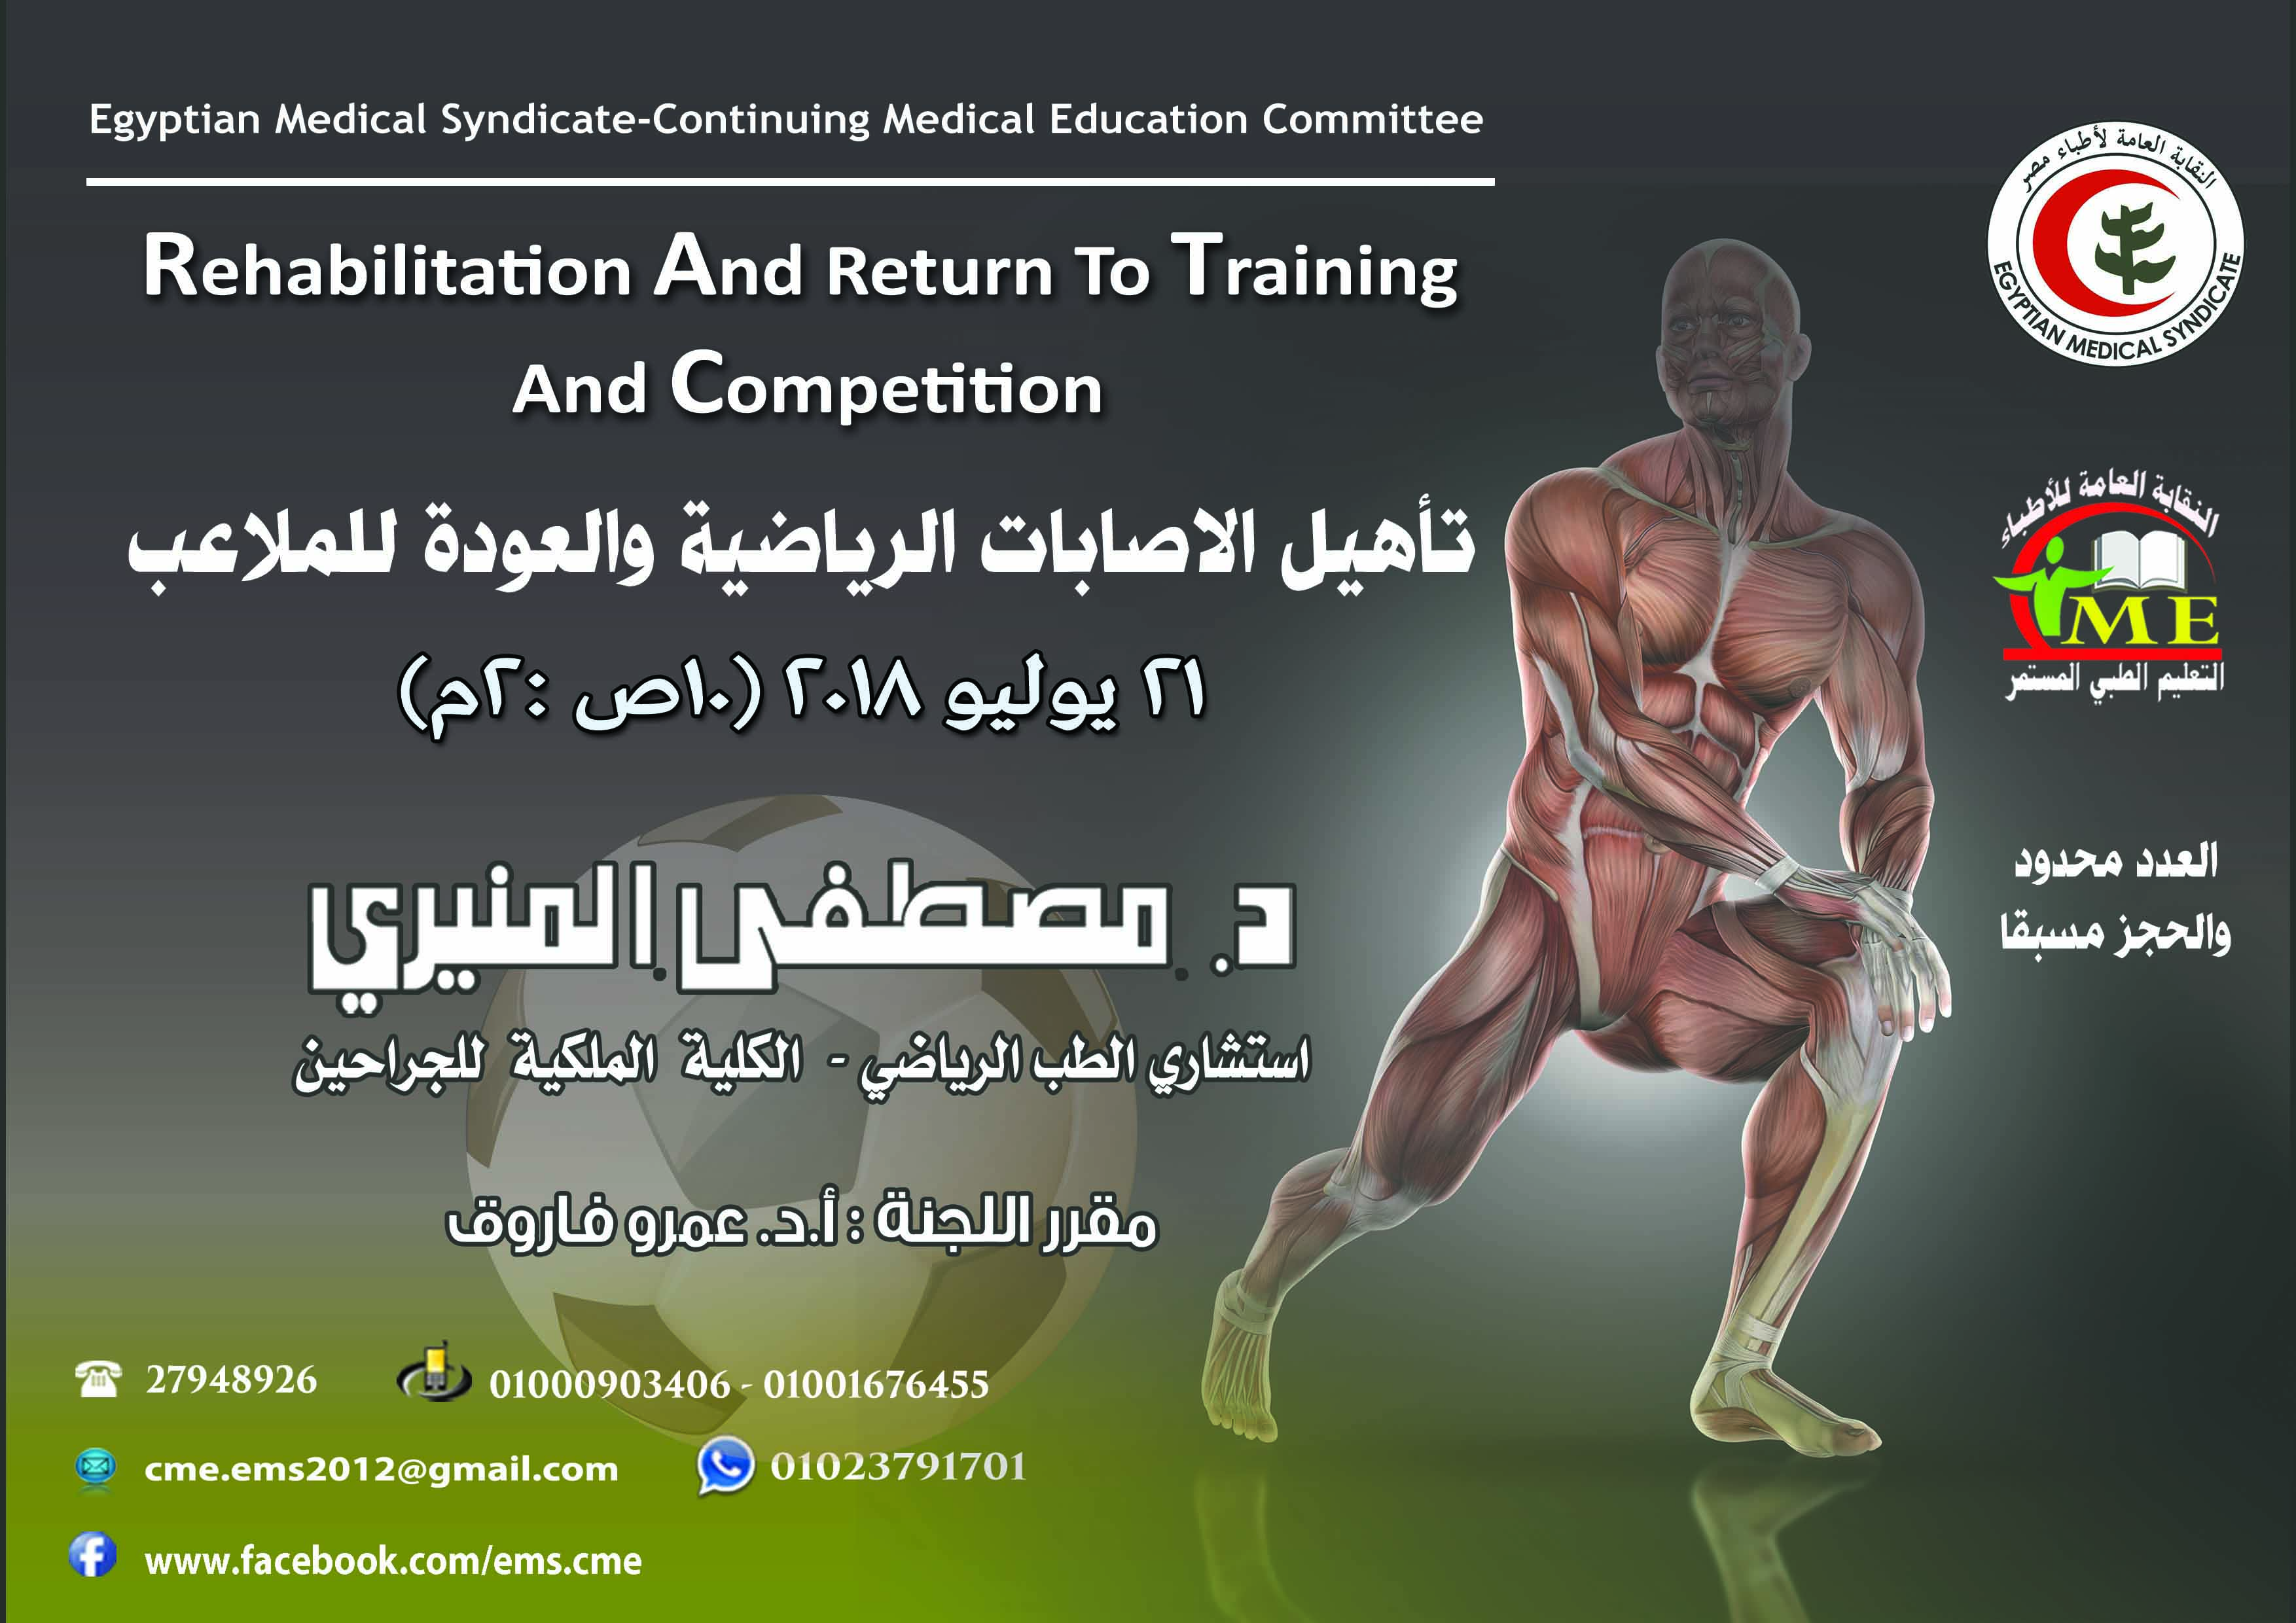 Rehabilitation And Return To Training And Competition